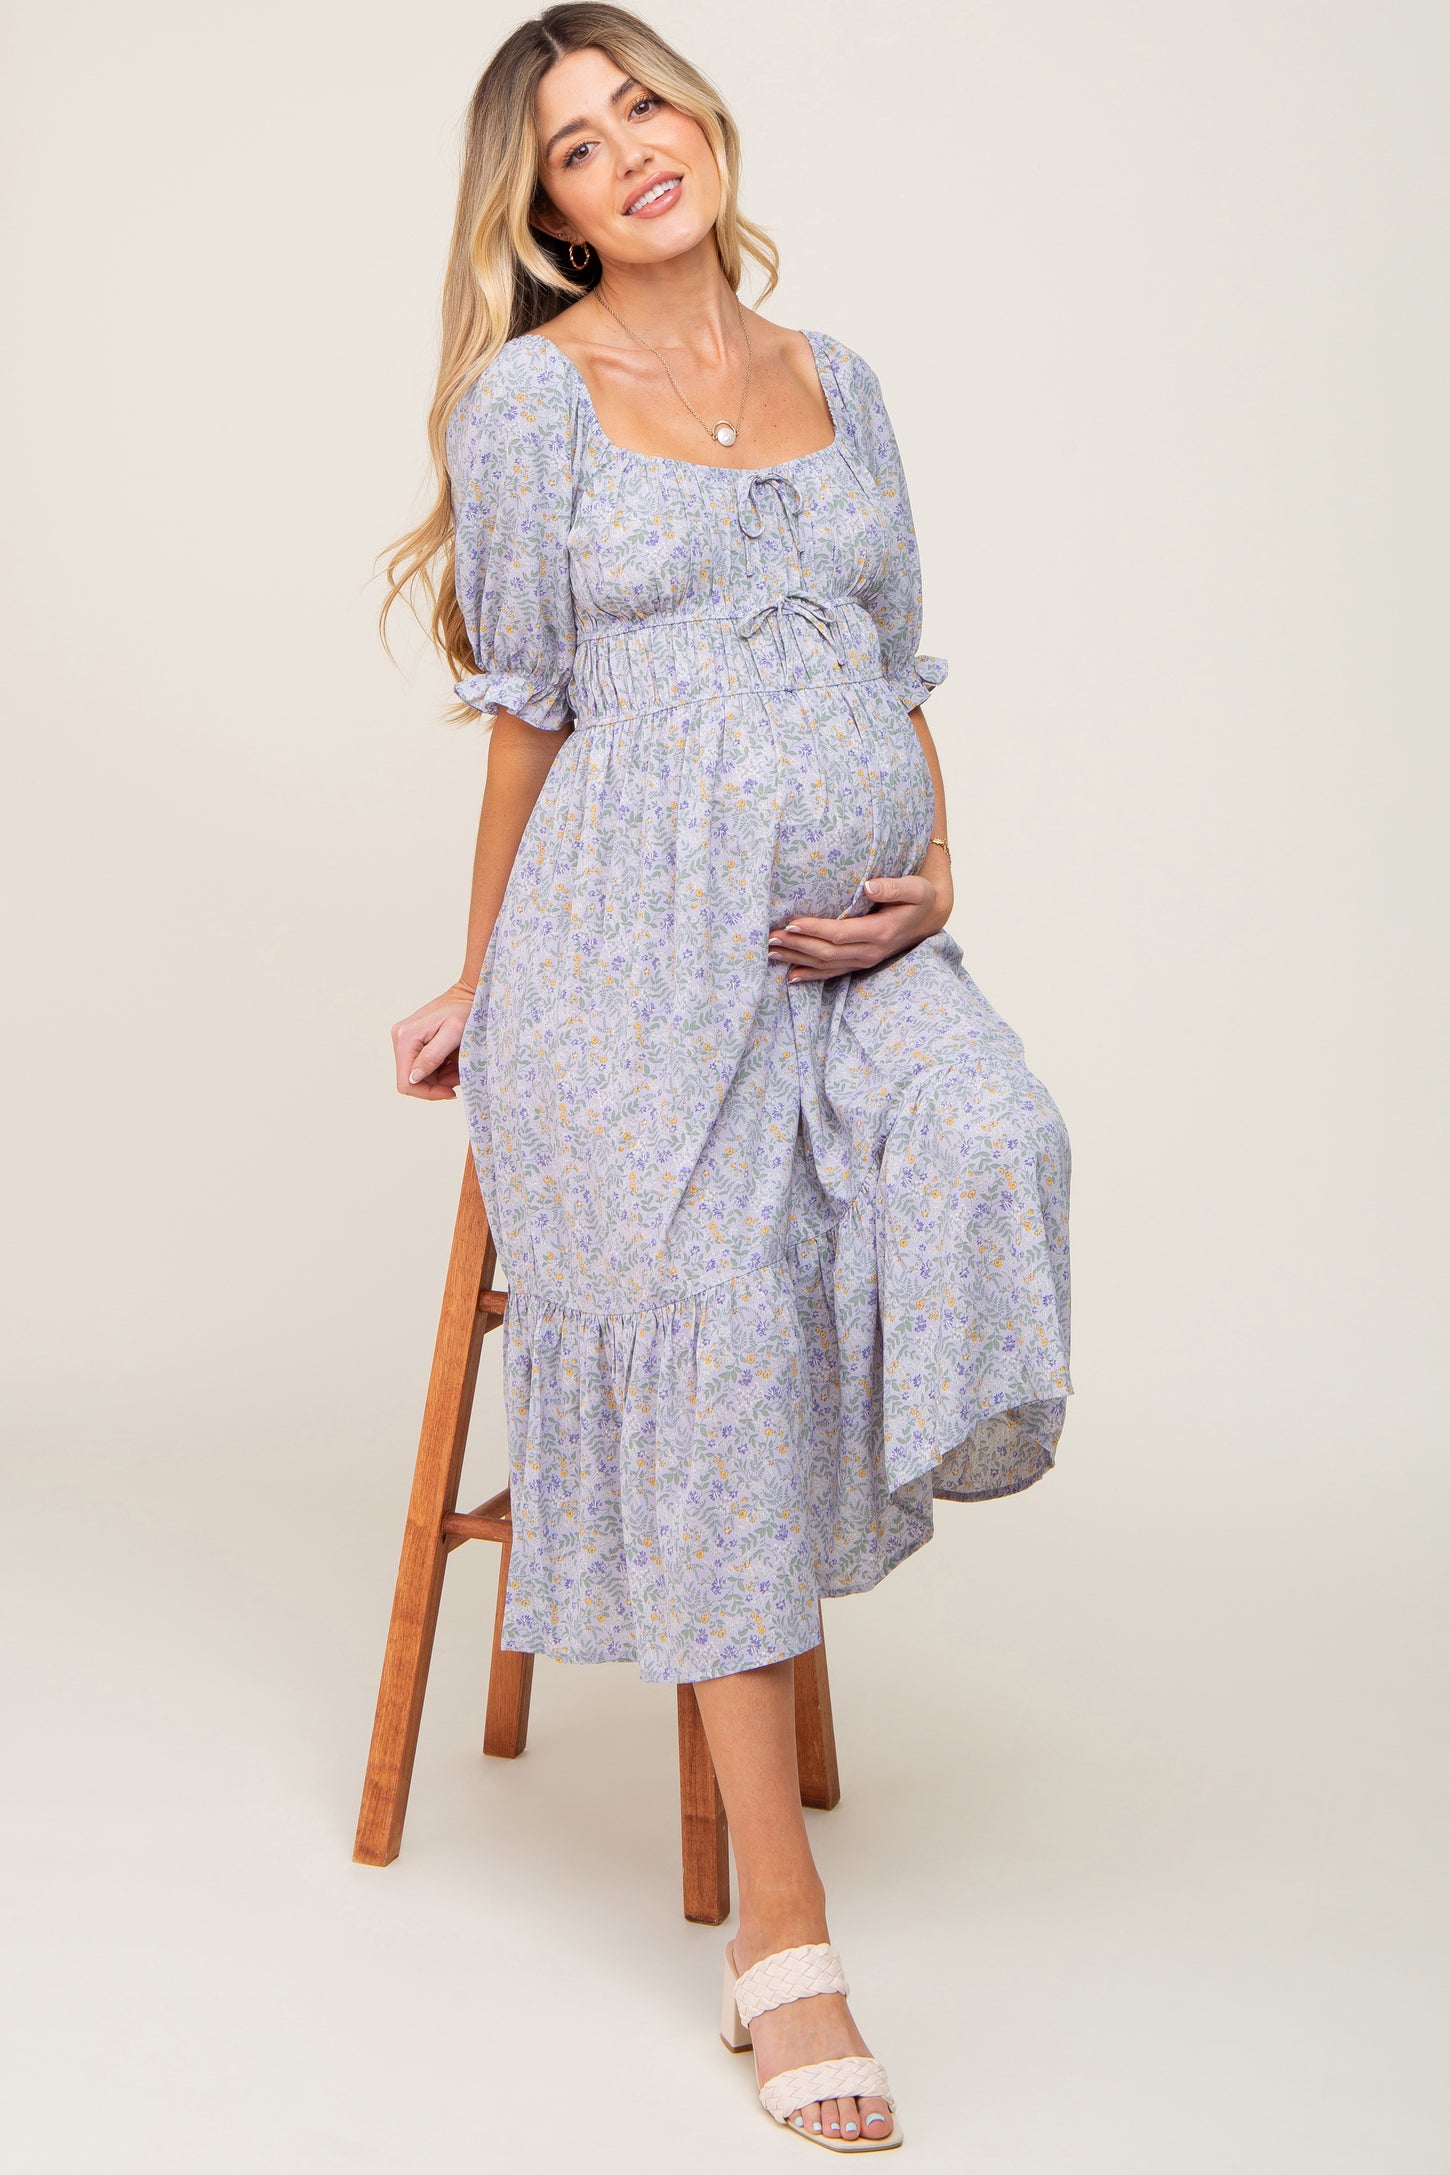 Periwinkle Floral Square Neck Front Tie Maternity Midi Dress